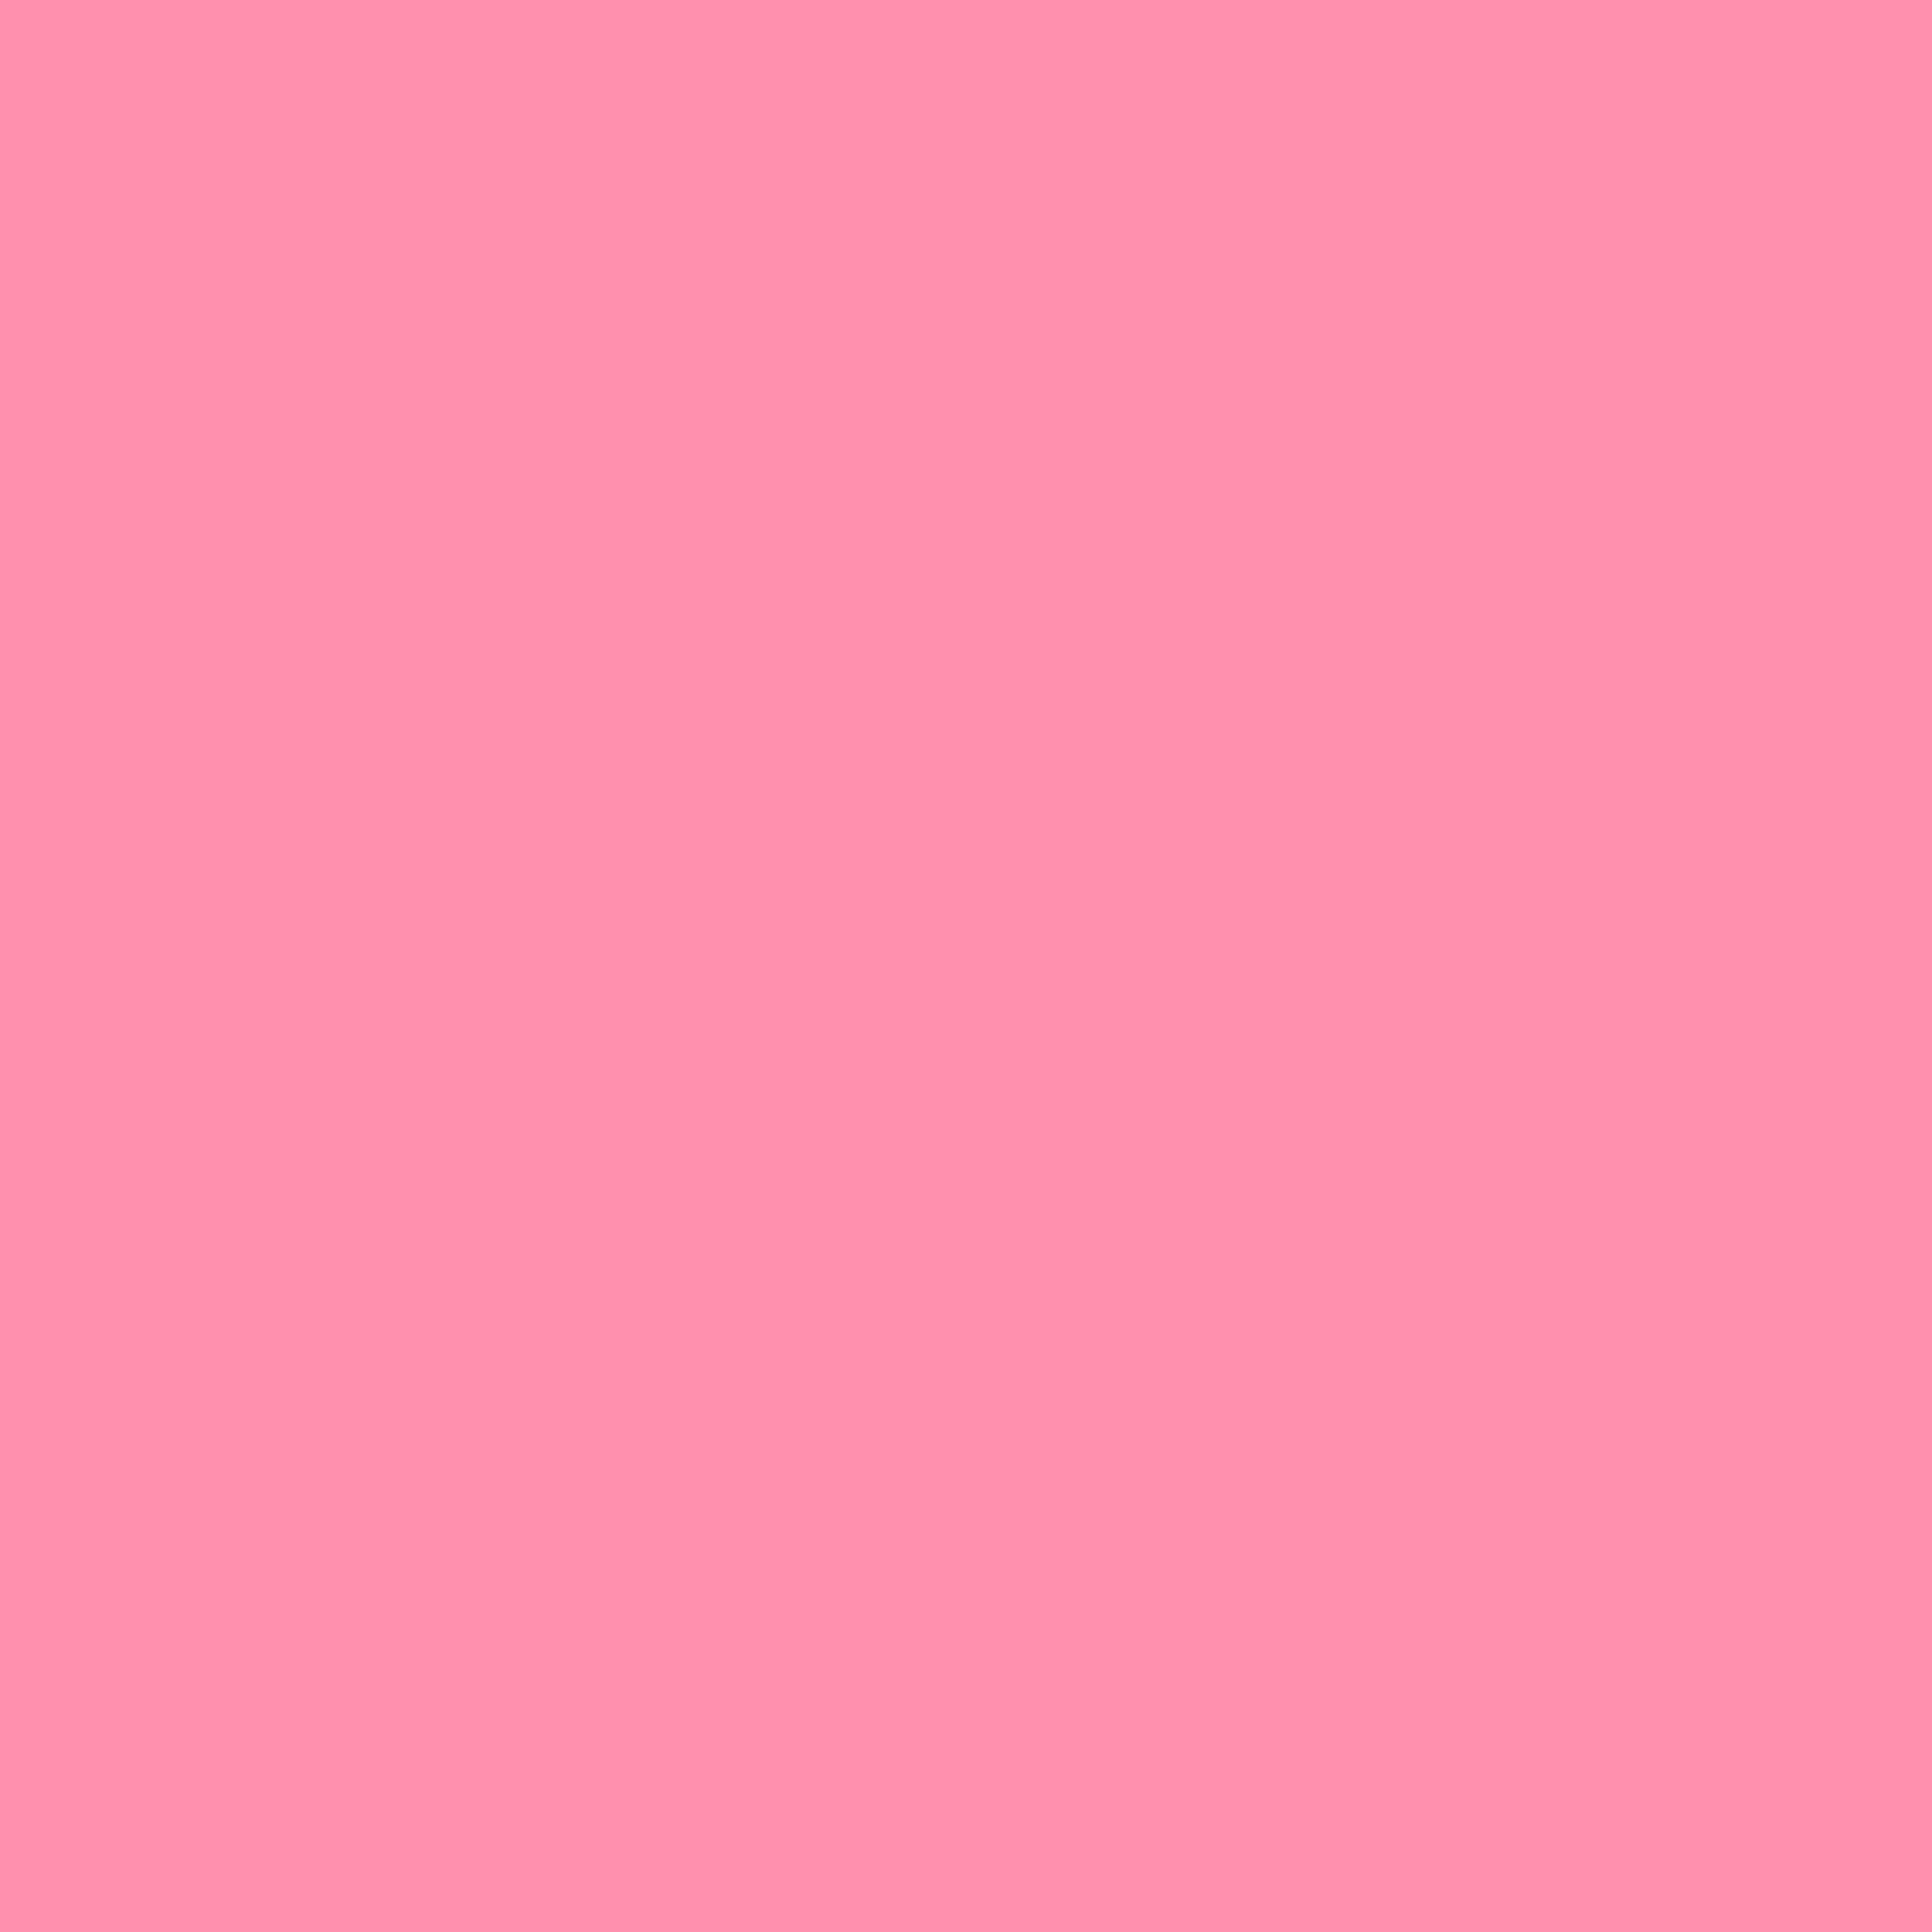 2732x2732 Schauss Pink Solid Color Background